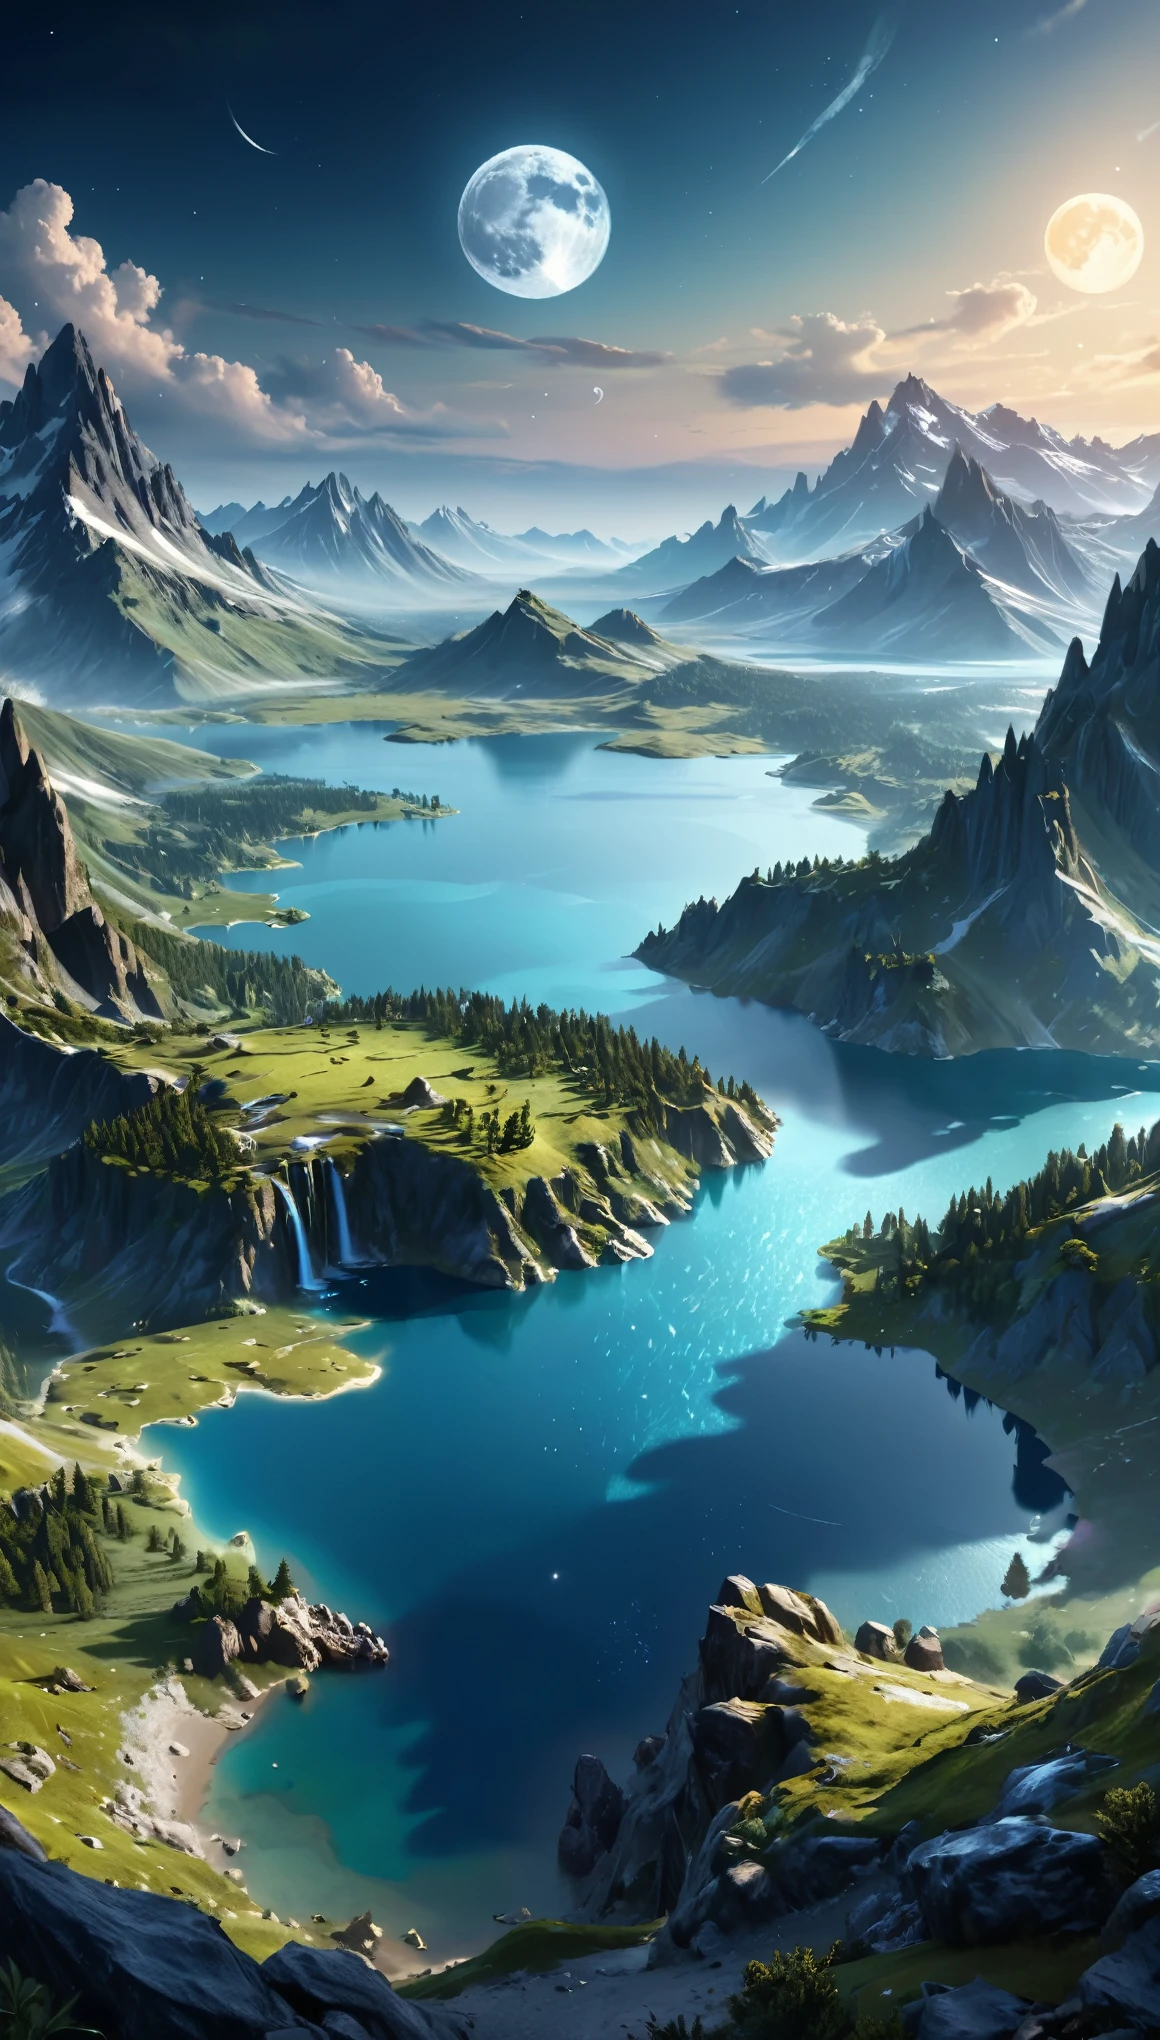 Mountains and lake with moon in the sky、highly detailed digital art in 4K、4K HD Wallpapers Highly detailed and impressive fantasy landscapes、Sci-Fi Fantasy Desktop Wallpaper、Unreal Engine 4K Wallpapers、4K detailed digital art、Sci-Fi Fantasy Wallpaper、Spectacular dreamy fantasy landscape、4K HD Matte Digital Painting、Stunning artwork in 8k